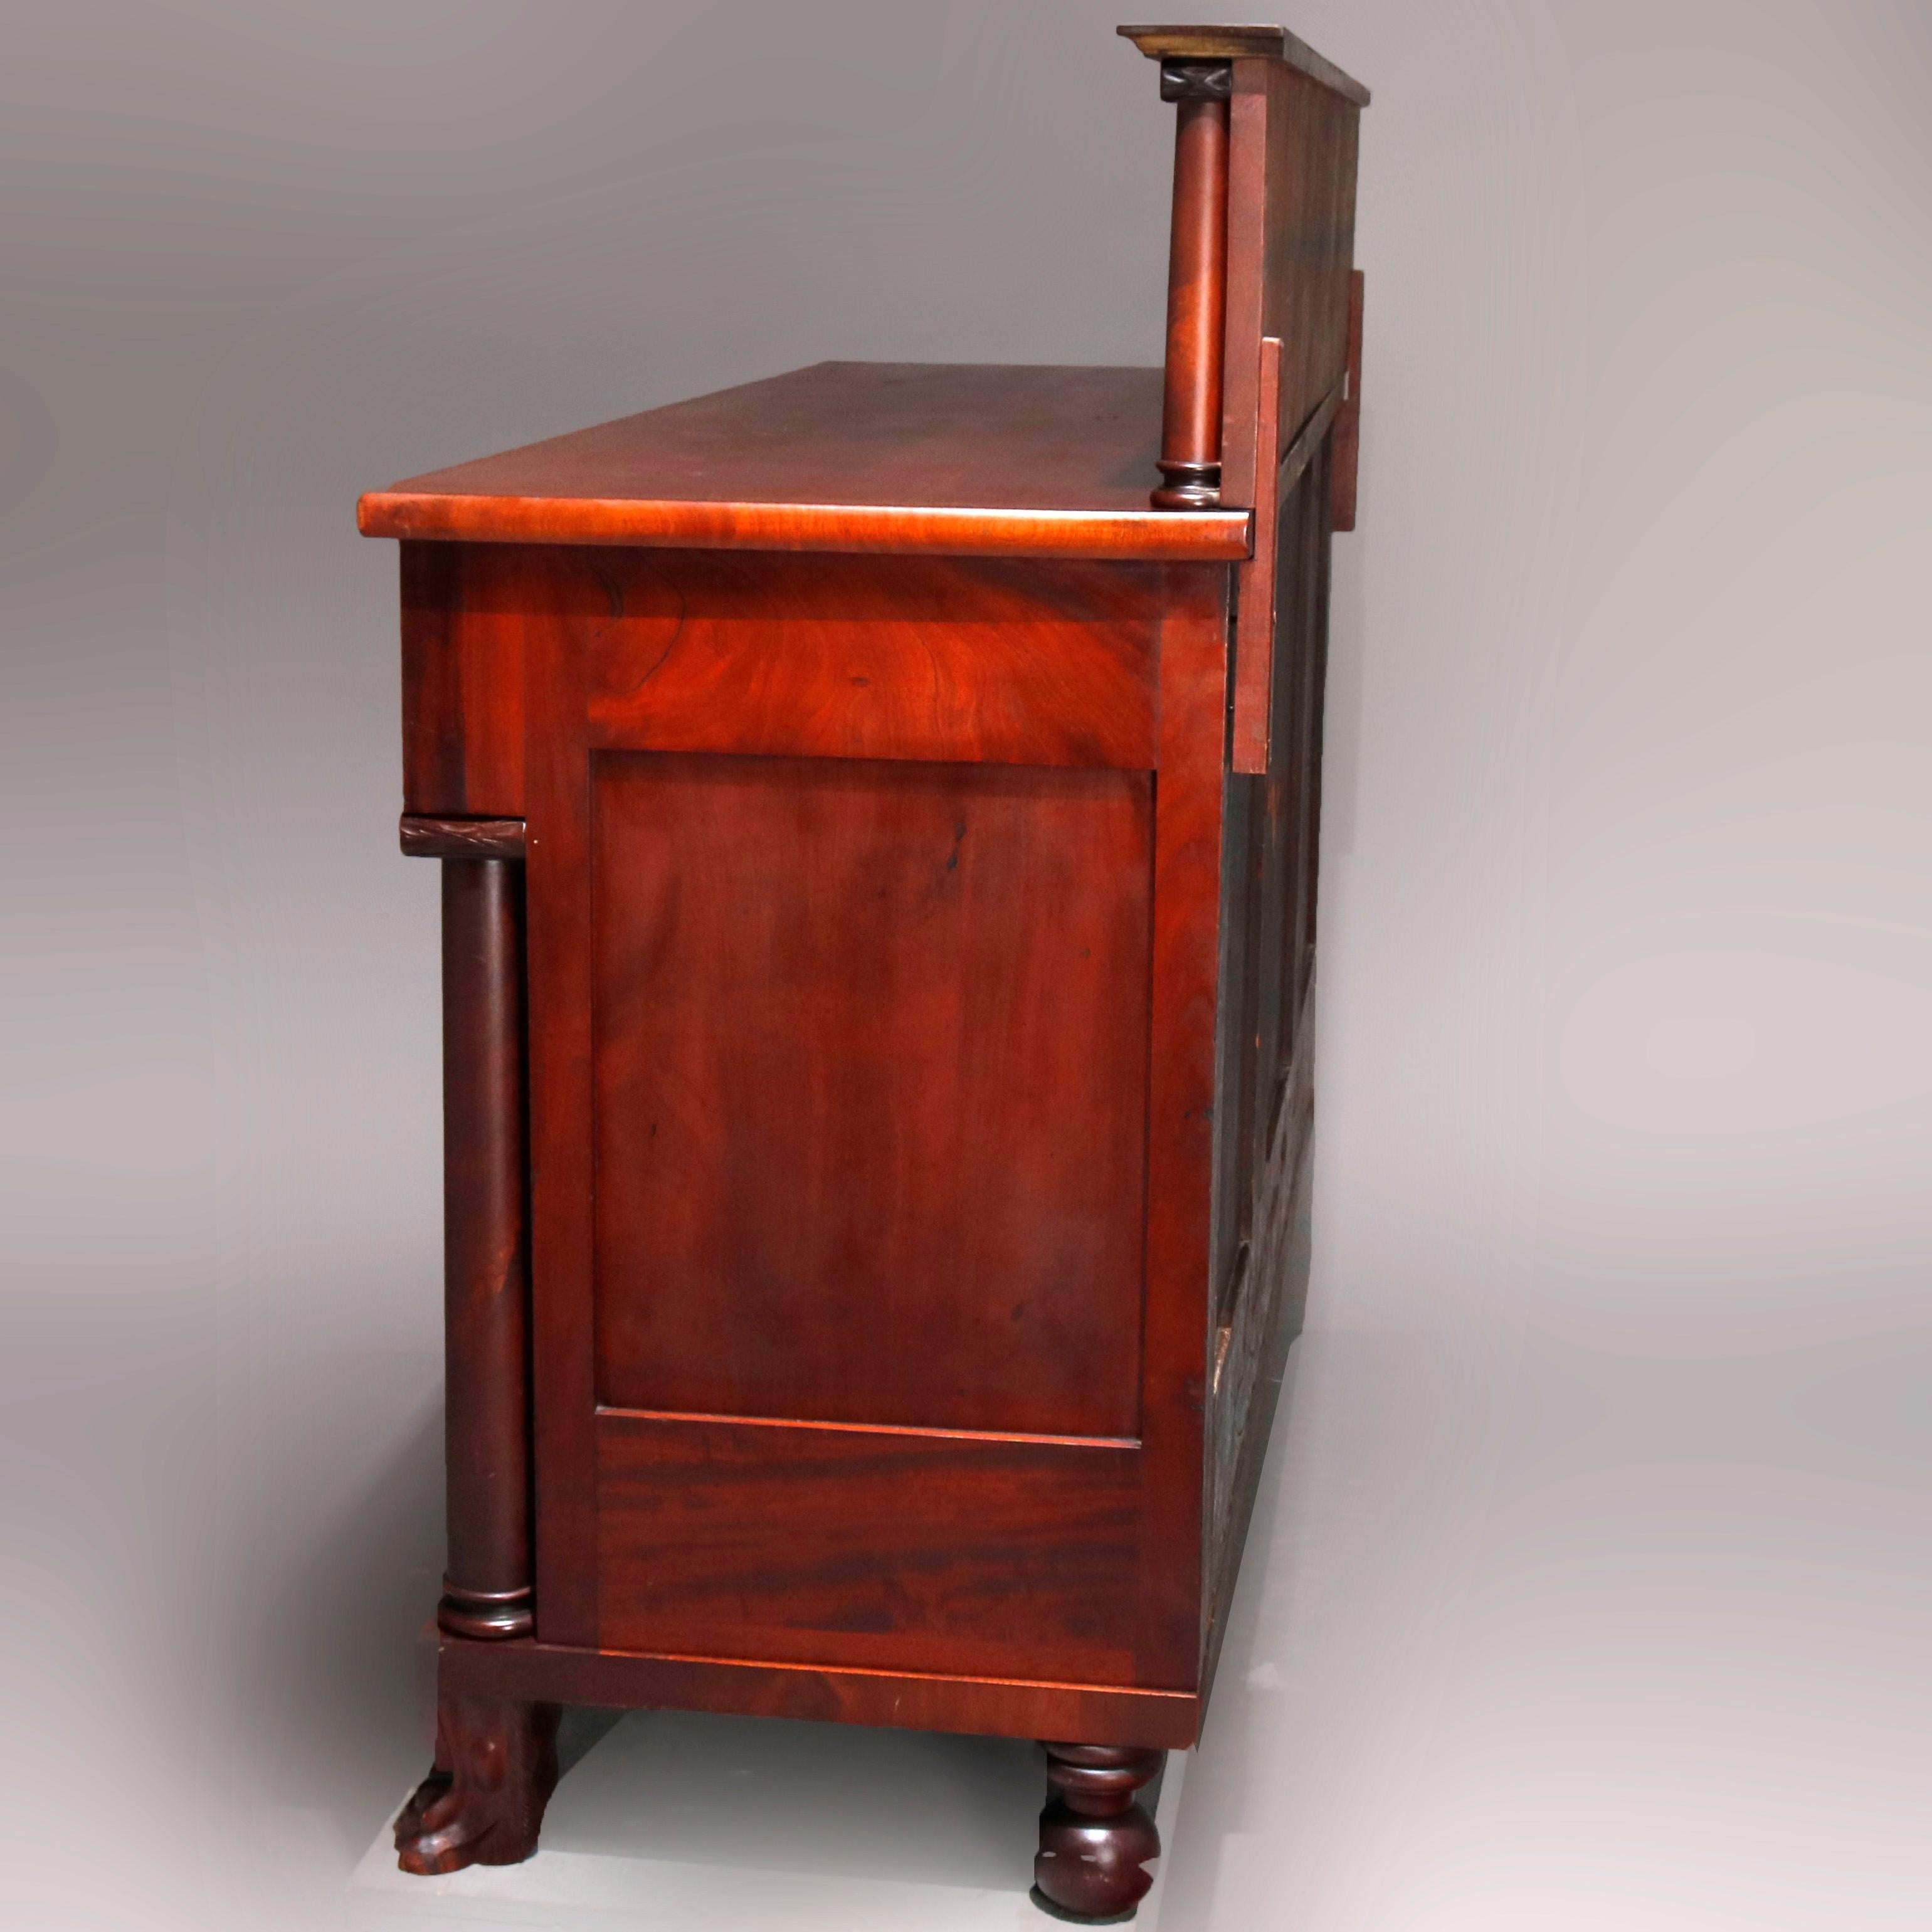 An antique American Empire Classical sideboard offers flame mahogany construction with oversized backsplash with carved Corinthian columns over counter surmounting case with upper drawers over central convex cabinet flanked by side compartments and